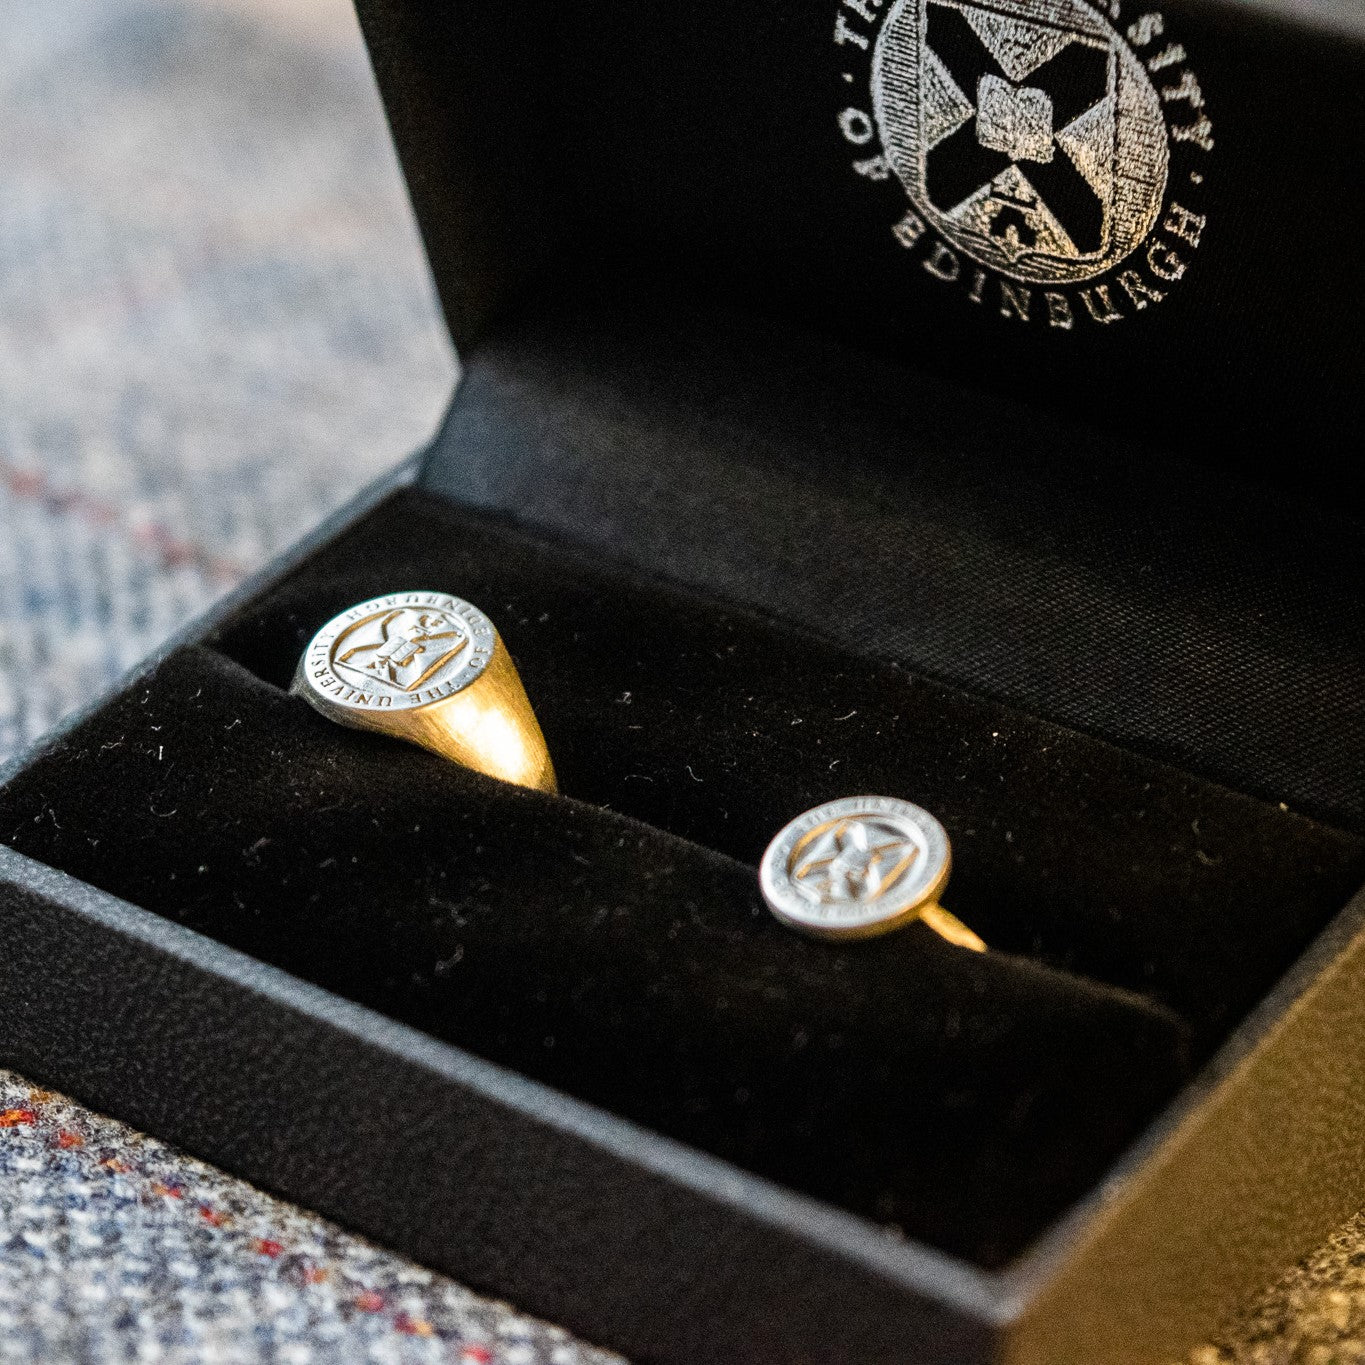 Silver crest on band and signet ring in silver in a ring box